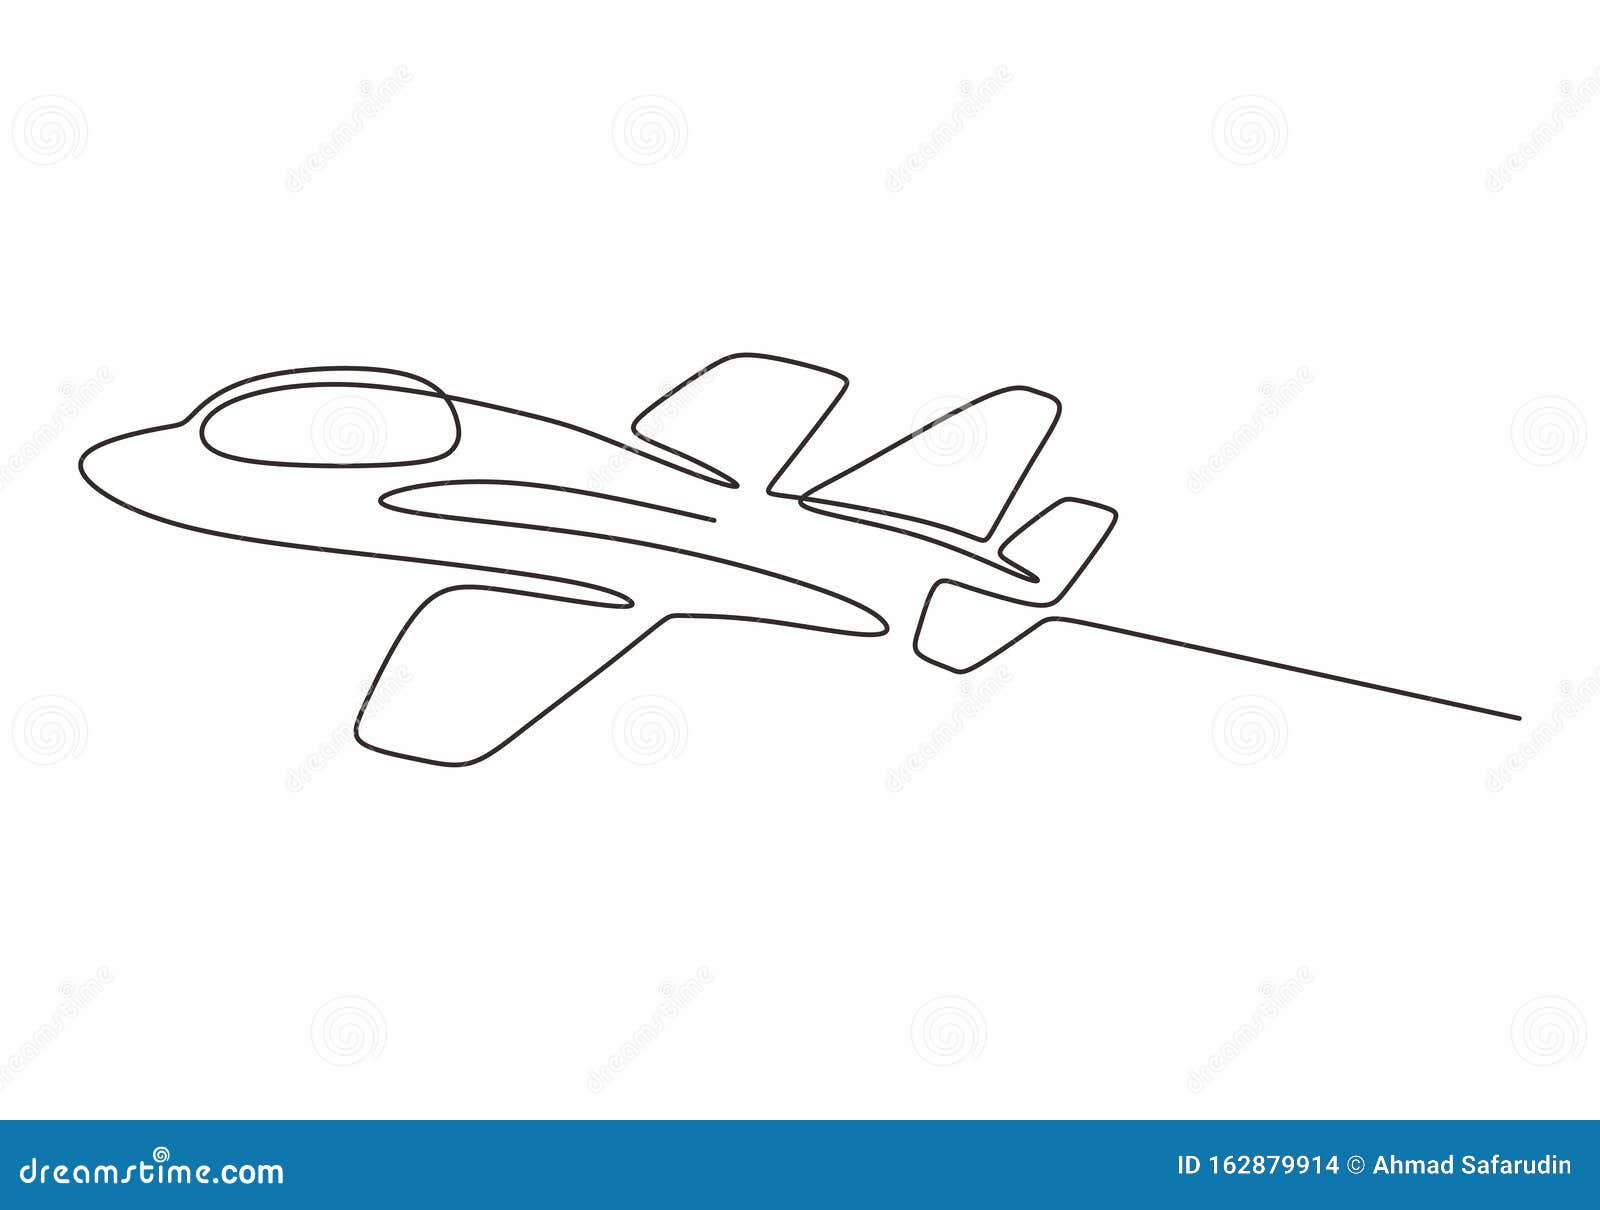 Details more than 143 aeroplane images for drawing best